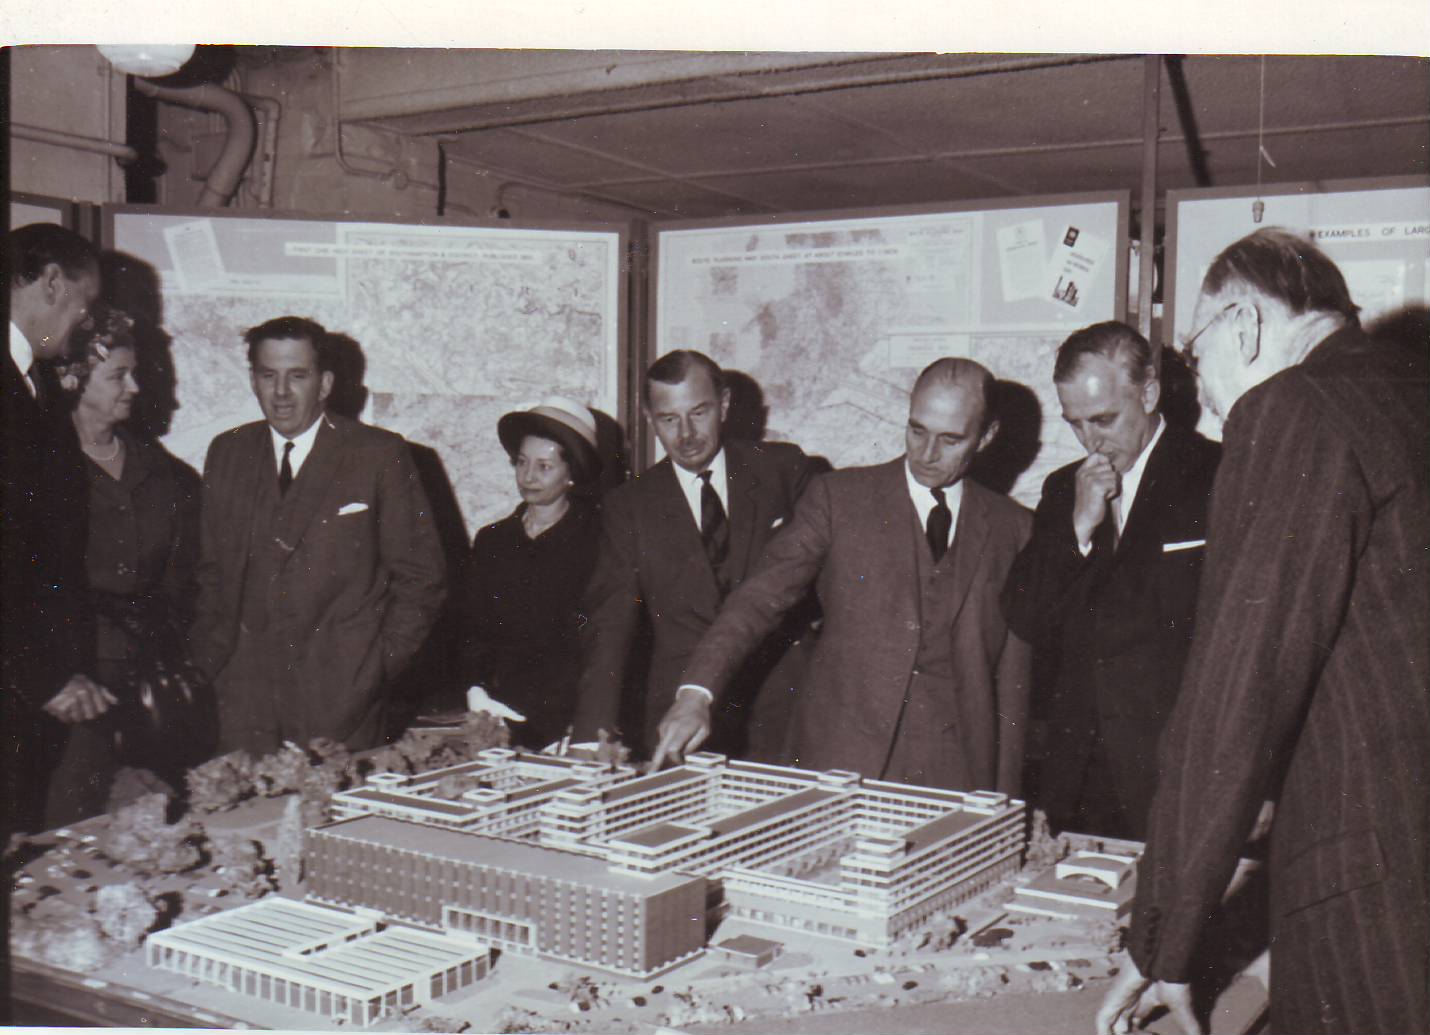 Dignitaries inspect a model of the new Maybush HQ